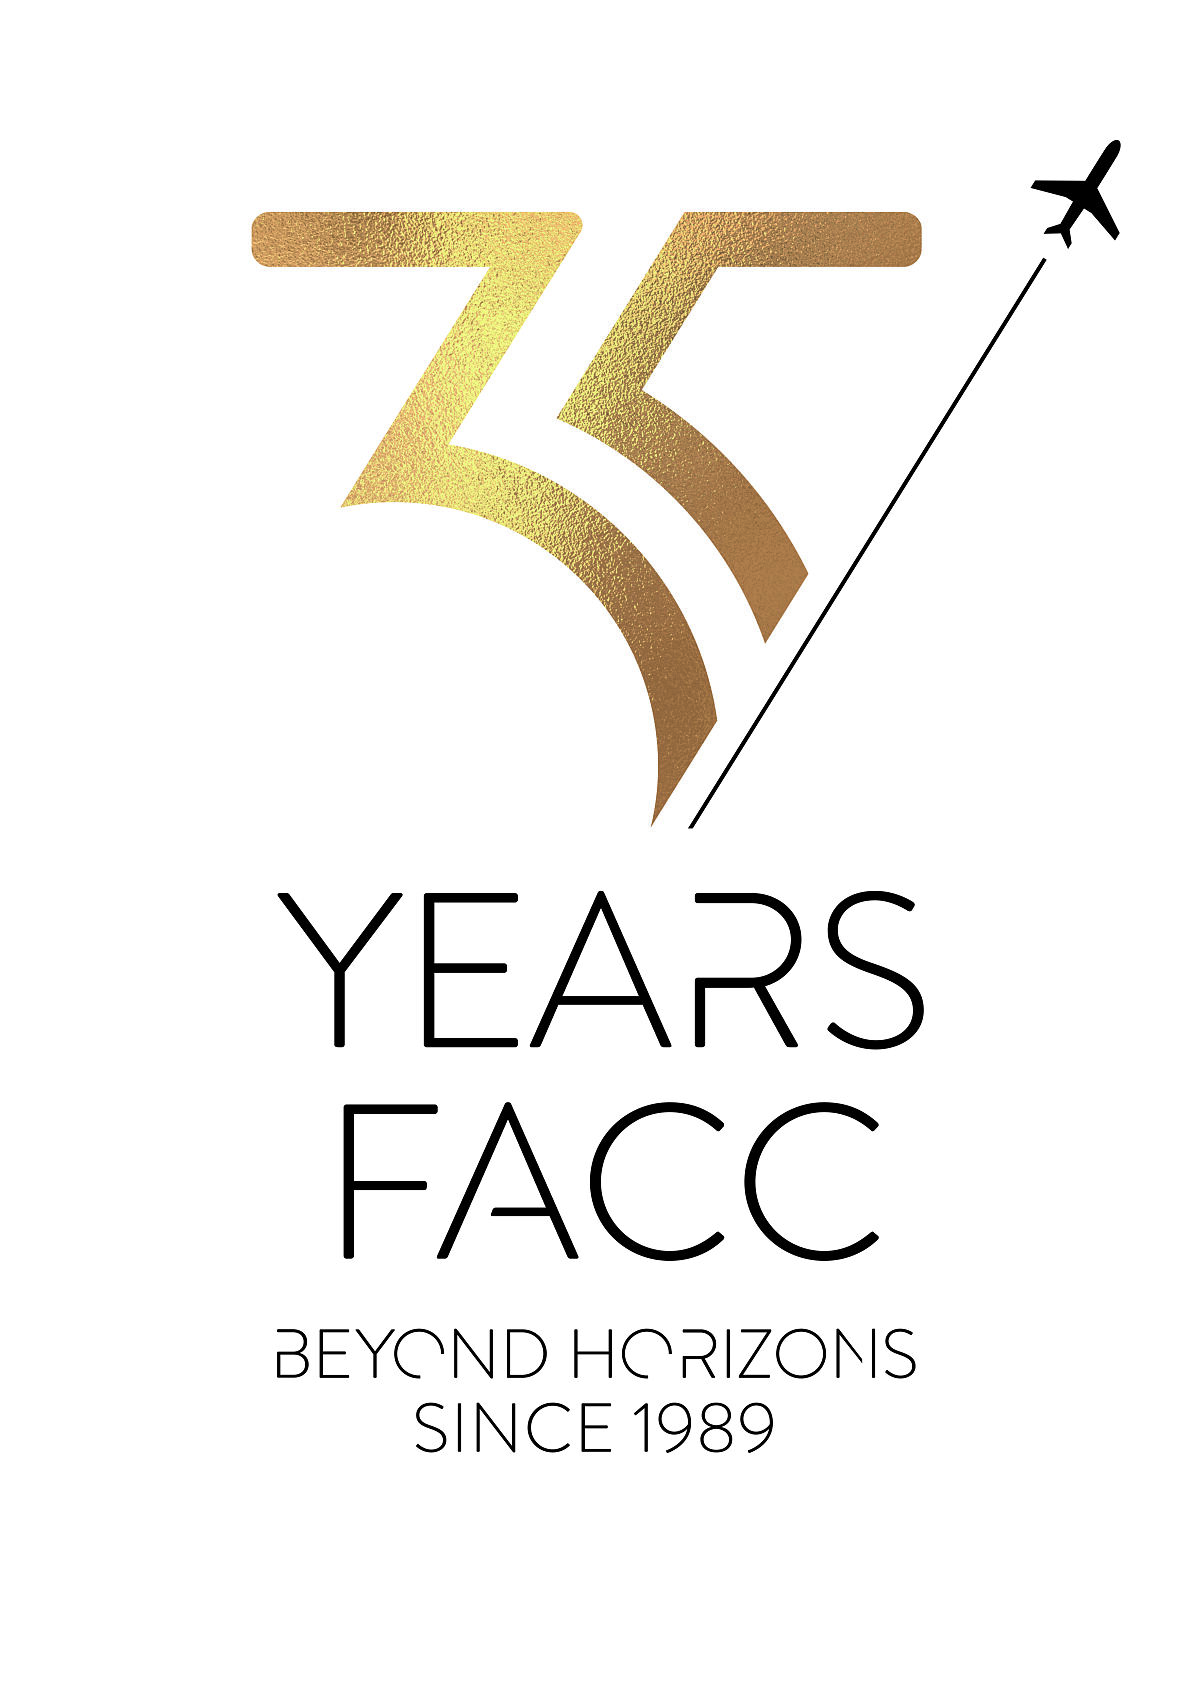 FACC is celebrating 35 years of innovation made in Austria in the aerospace industry